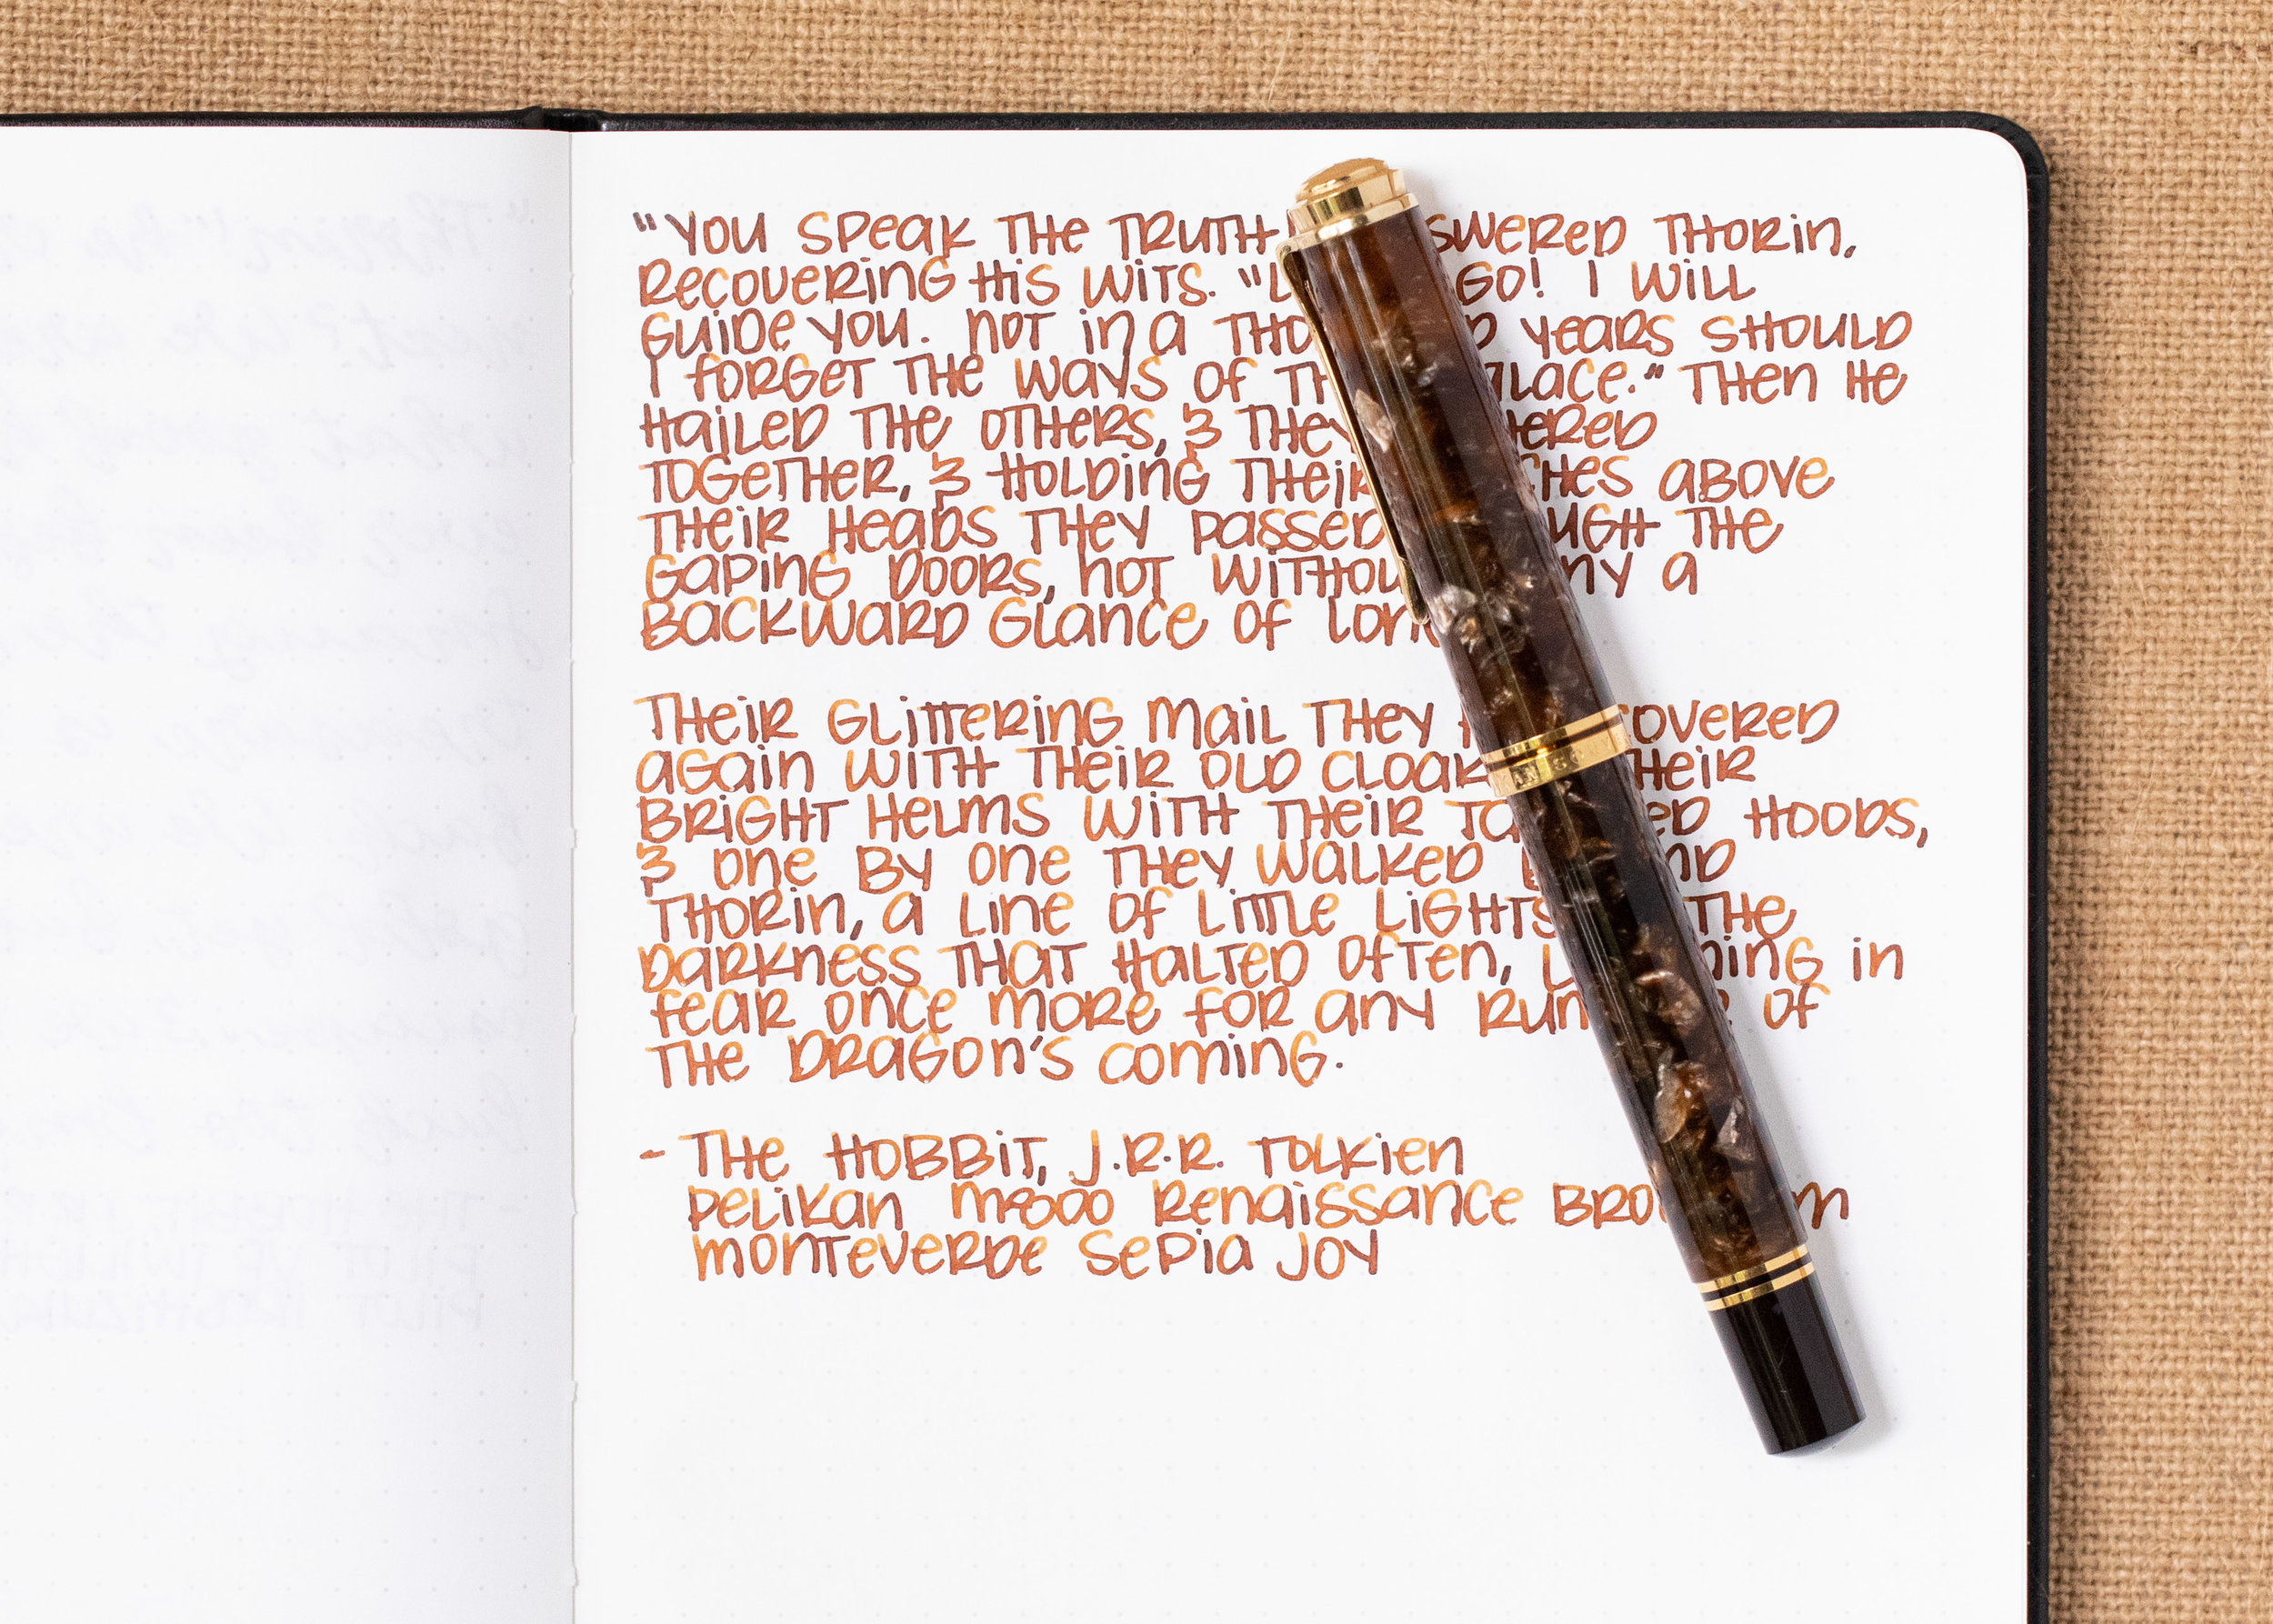 Monteverde Black – Handwritten Ink Review –  – Fountain Pen, Ink,  and Stationery Reviews